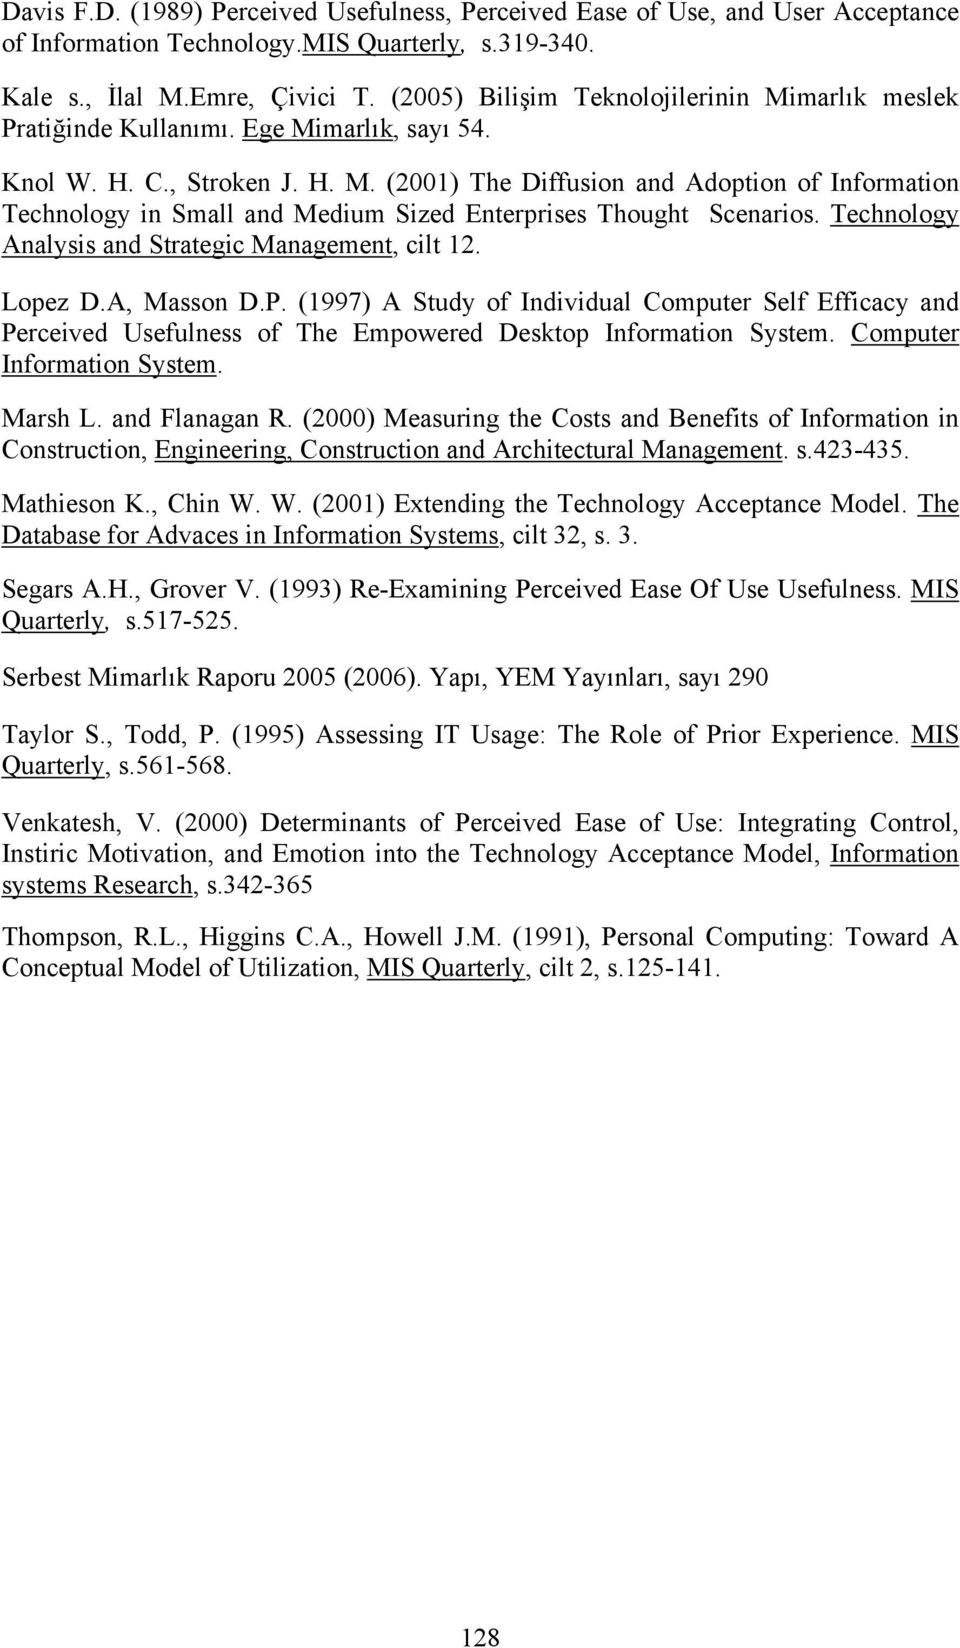 Technology Analysis and Strategic Management, cilt 12. Lopez D.A, Masson D.P. (1997) A Study of Individual Computer Self Efficacy and Perceived Usefulness of The Empowered Desktop Information System.